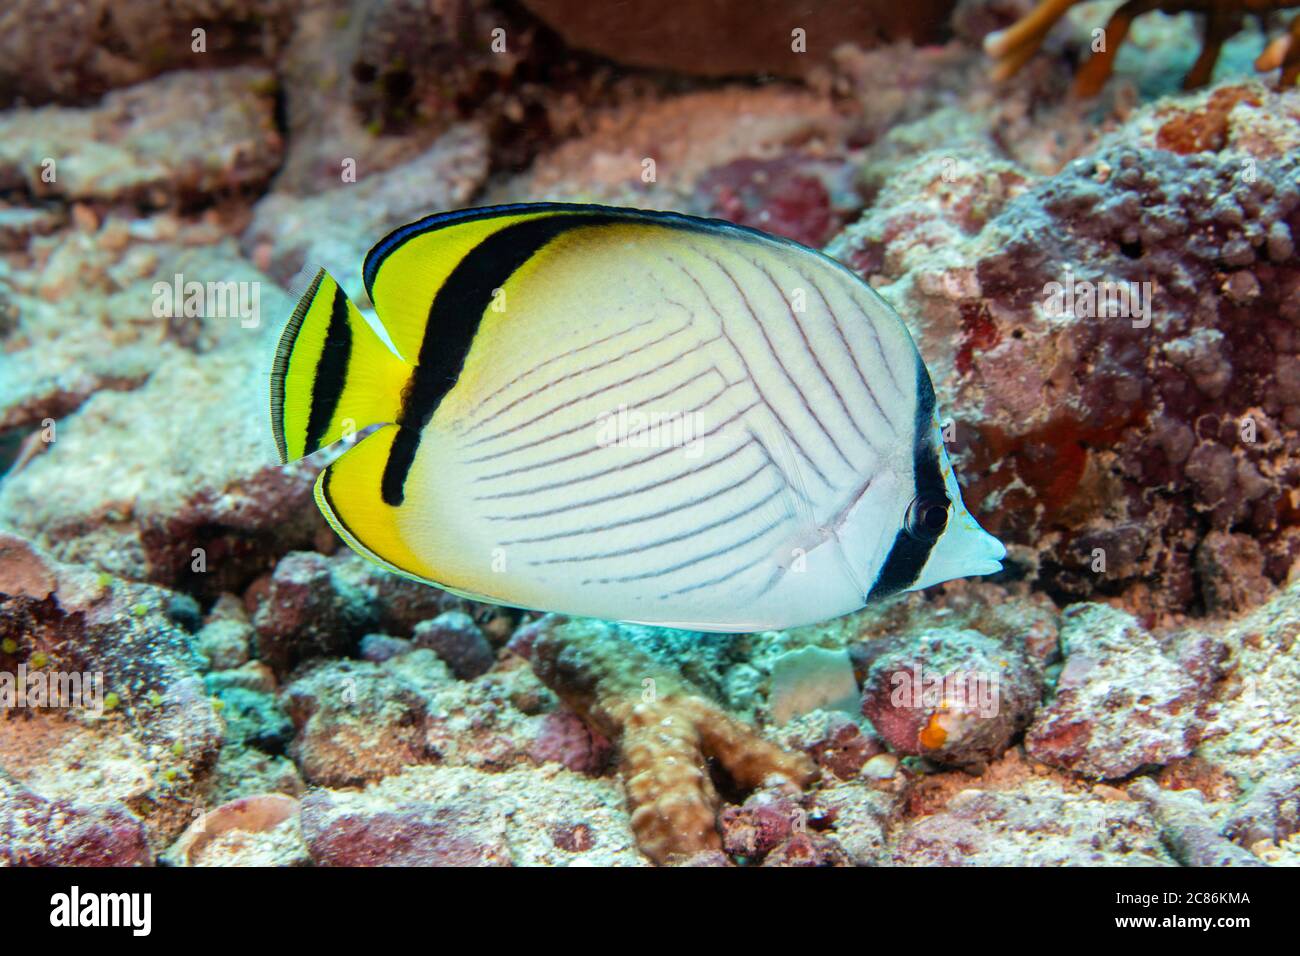 Vagabond butterflyfish, Chaetodon vagabundus, reach nine inches in length and are often found in pairs, Yap, Micronesia. Stock Photo